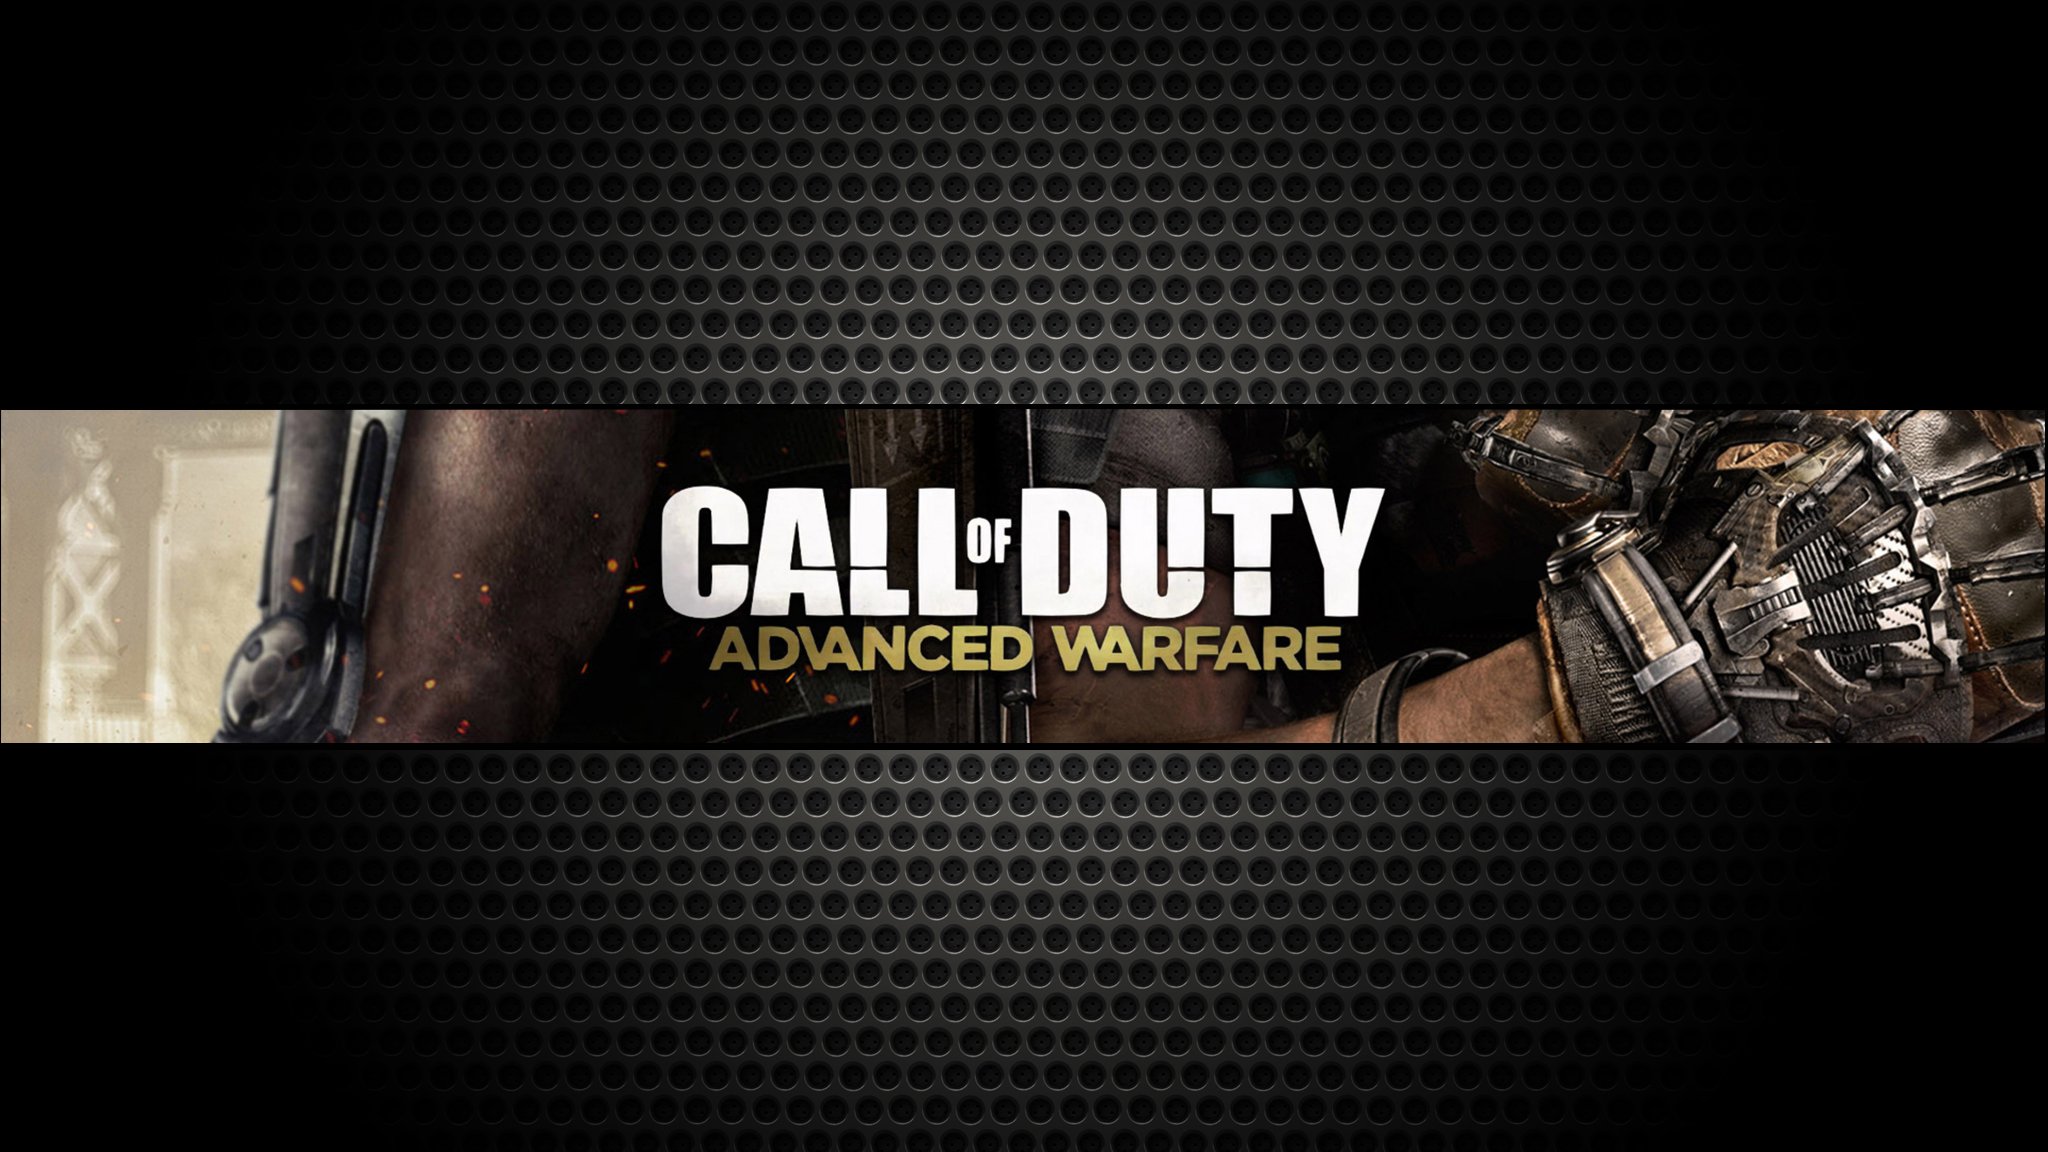 call, Of, Duty, Advanced, Warfare, Tactical, Shooter, Stealth, Action, Military, Fighting, Cod, Sci fi Wallpaper